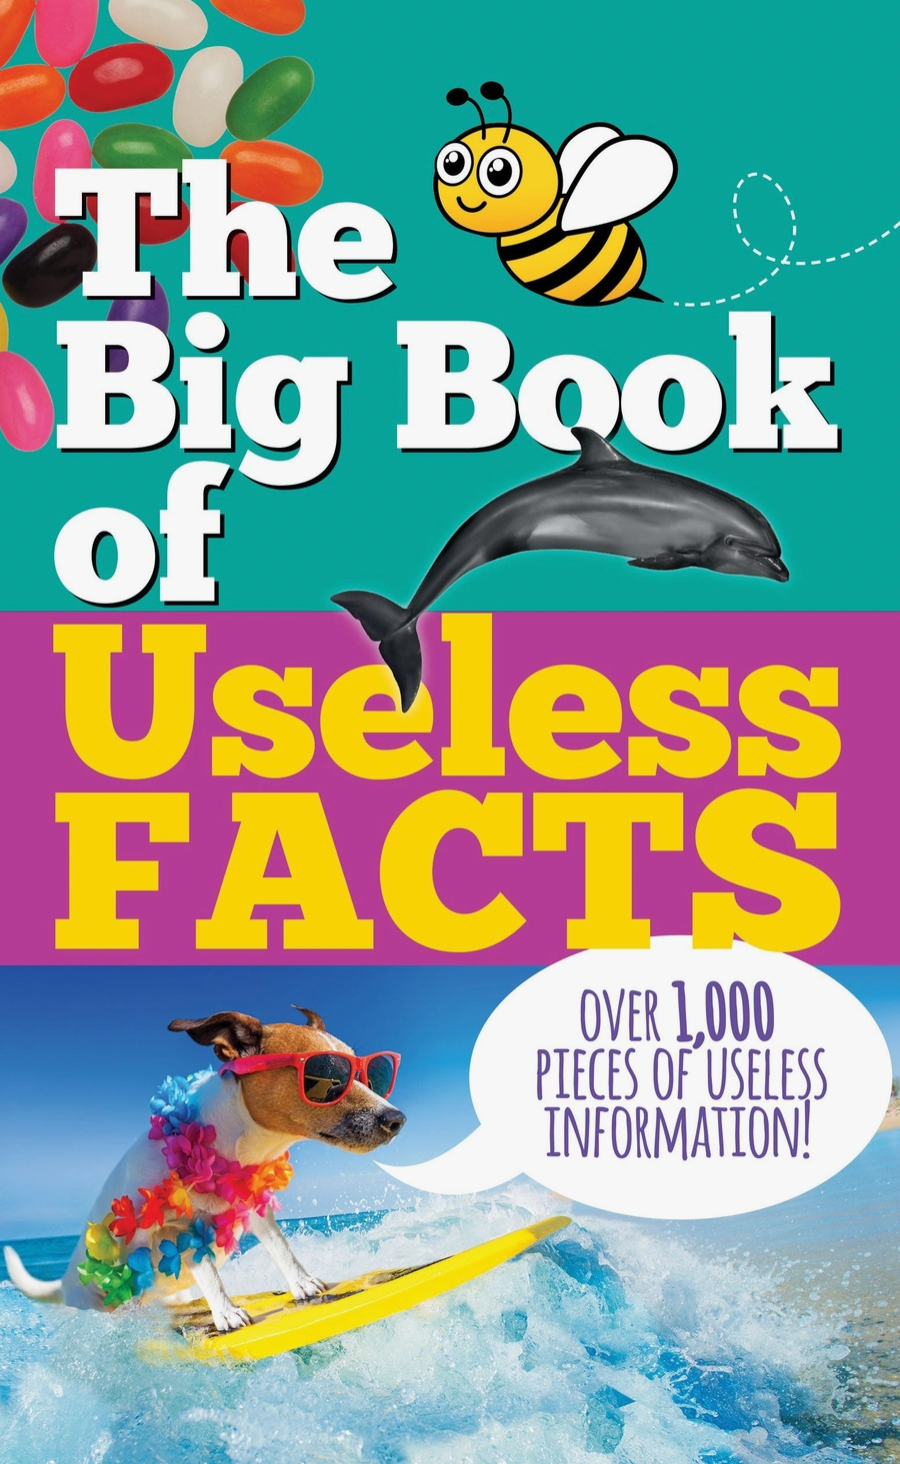 THE BIG BOOK OF USELESS FACTS